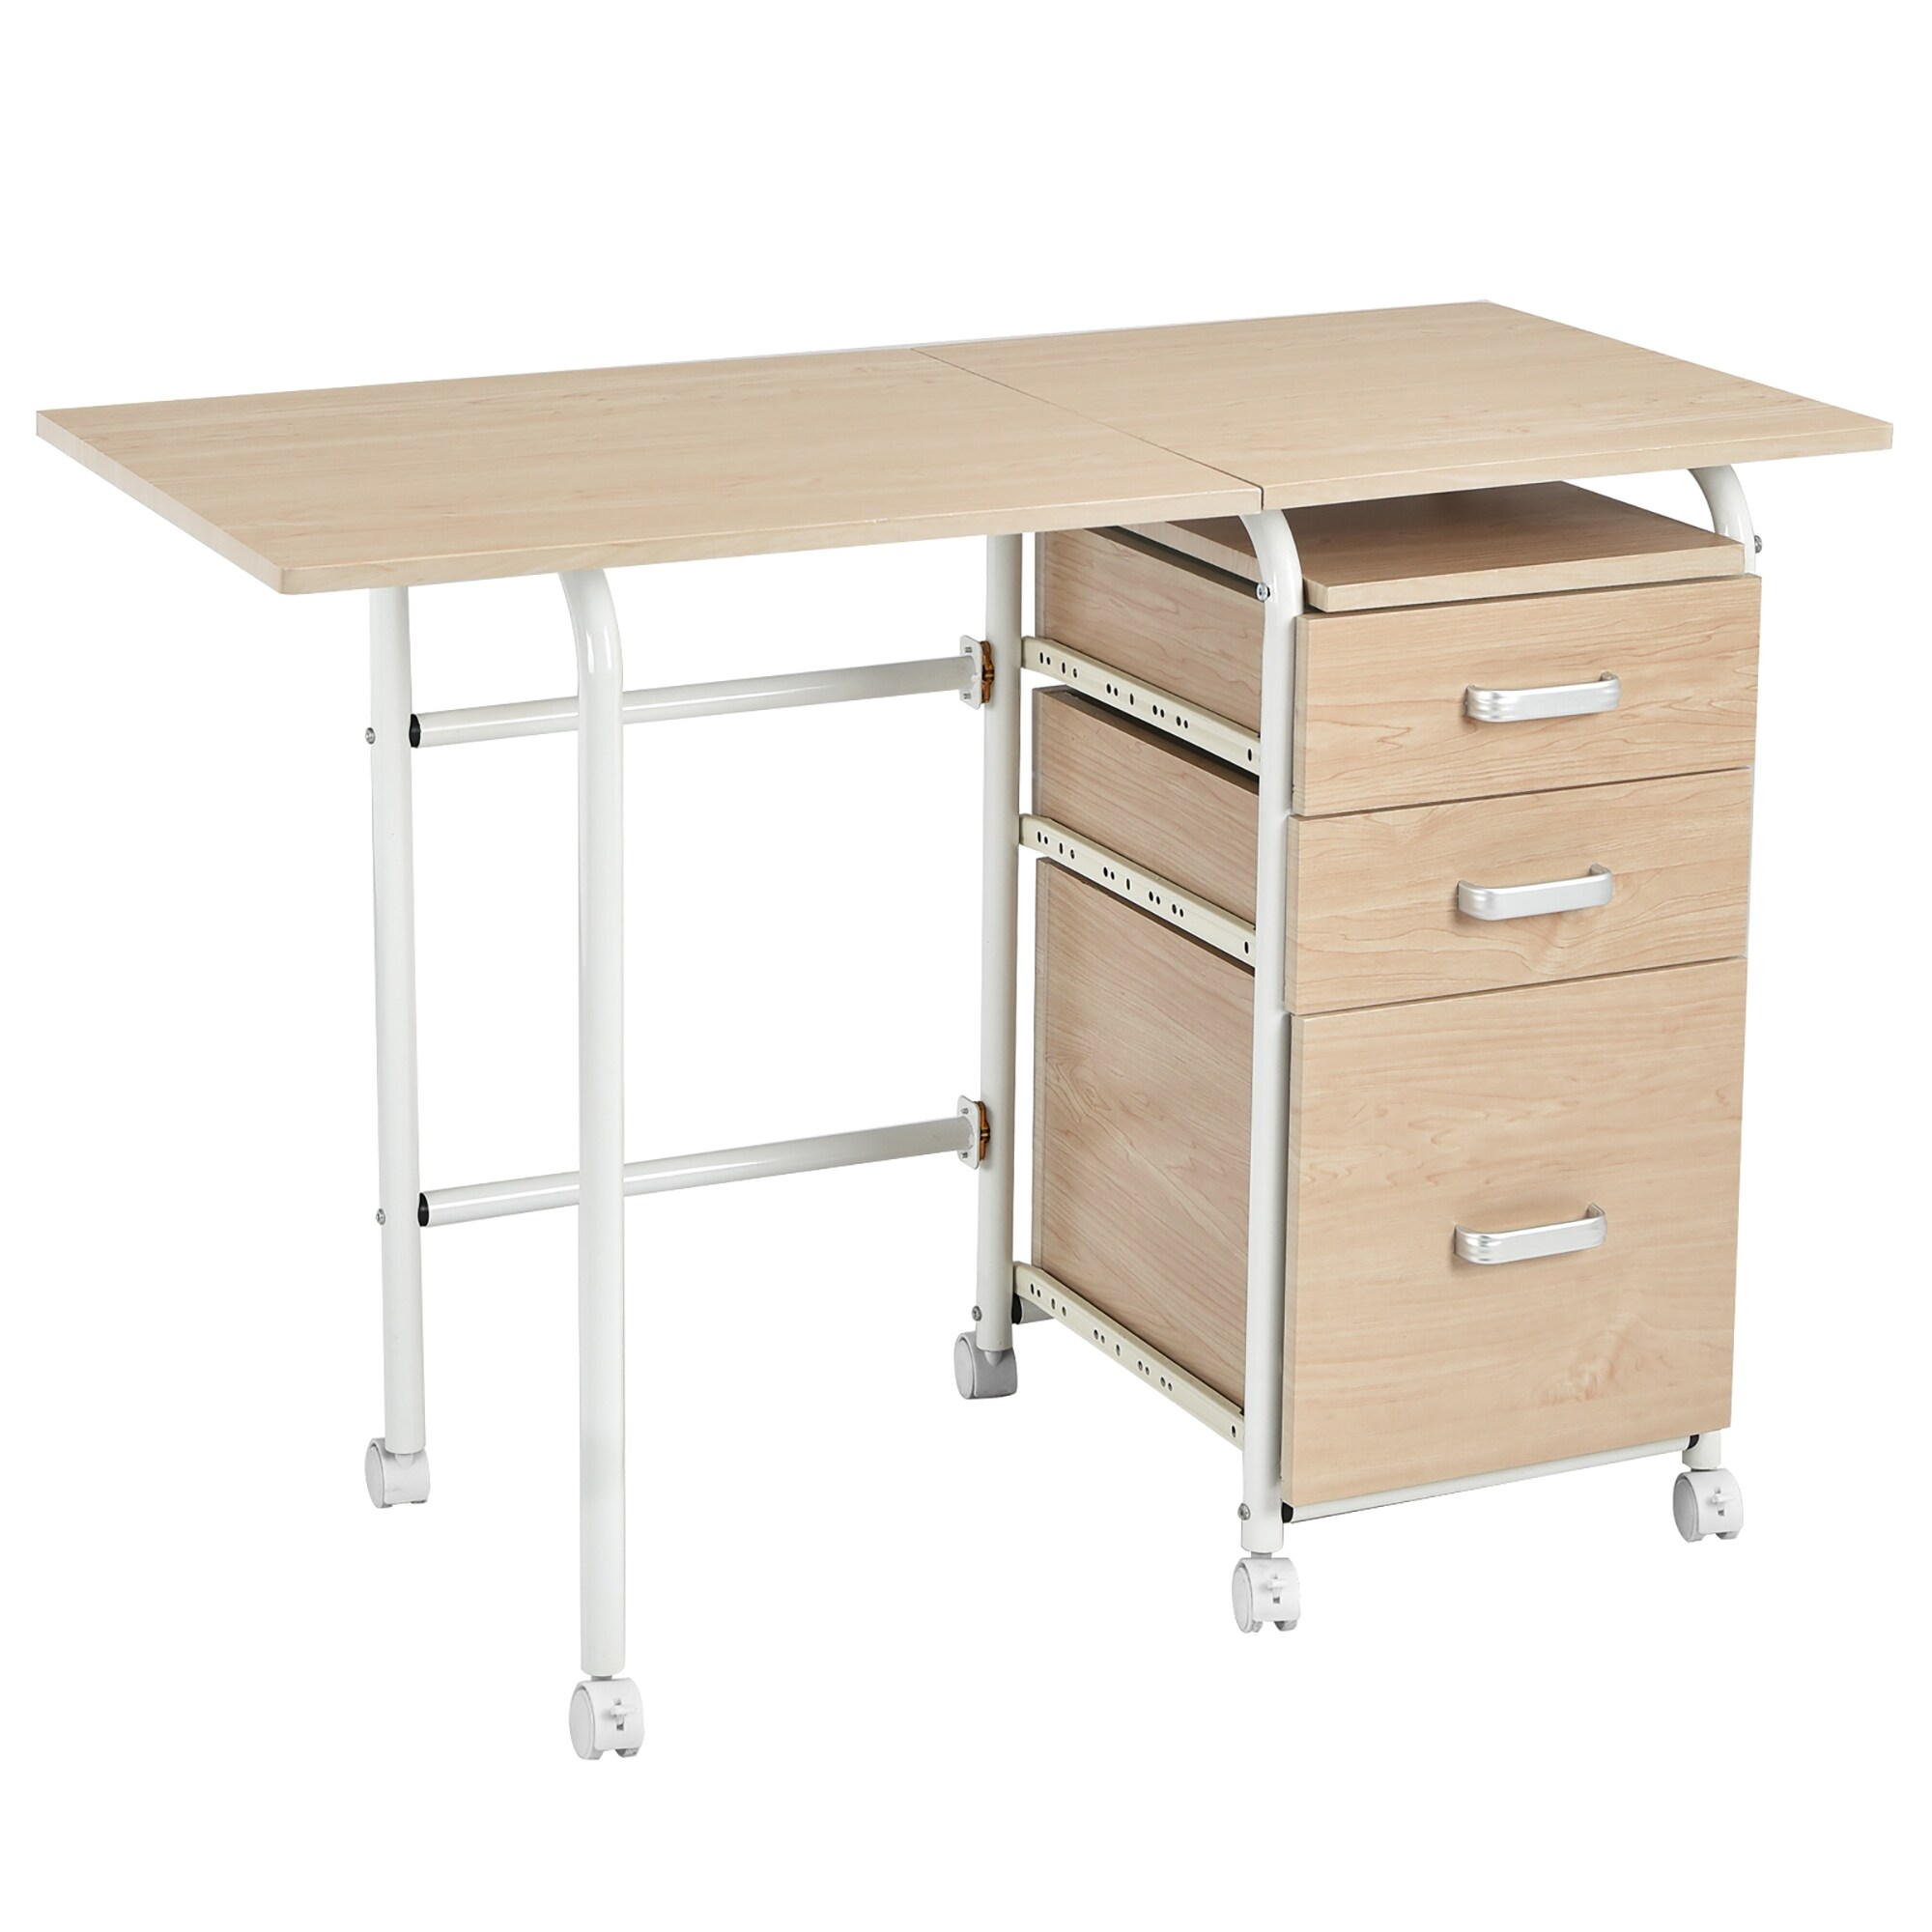 Panana-B Folding Computer Desk with 3 Drawers Storage Office Storage Filing Desk PC Workstation Table Home Beech 